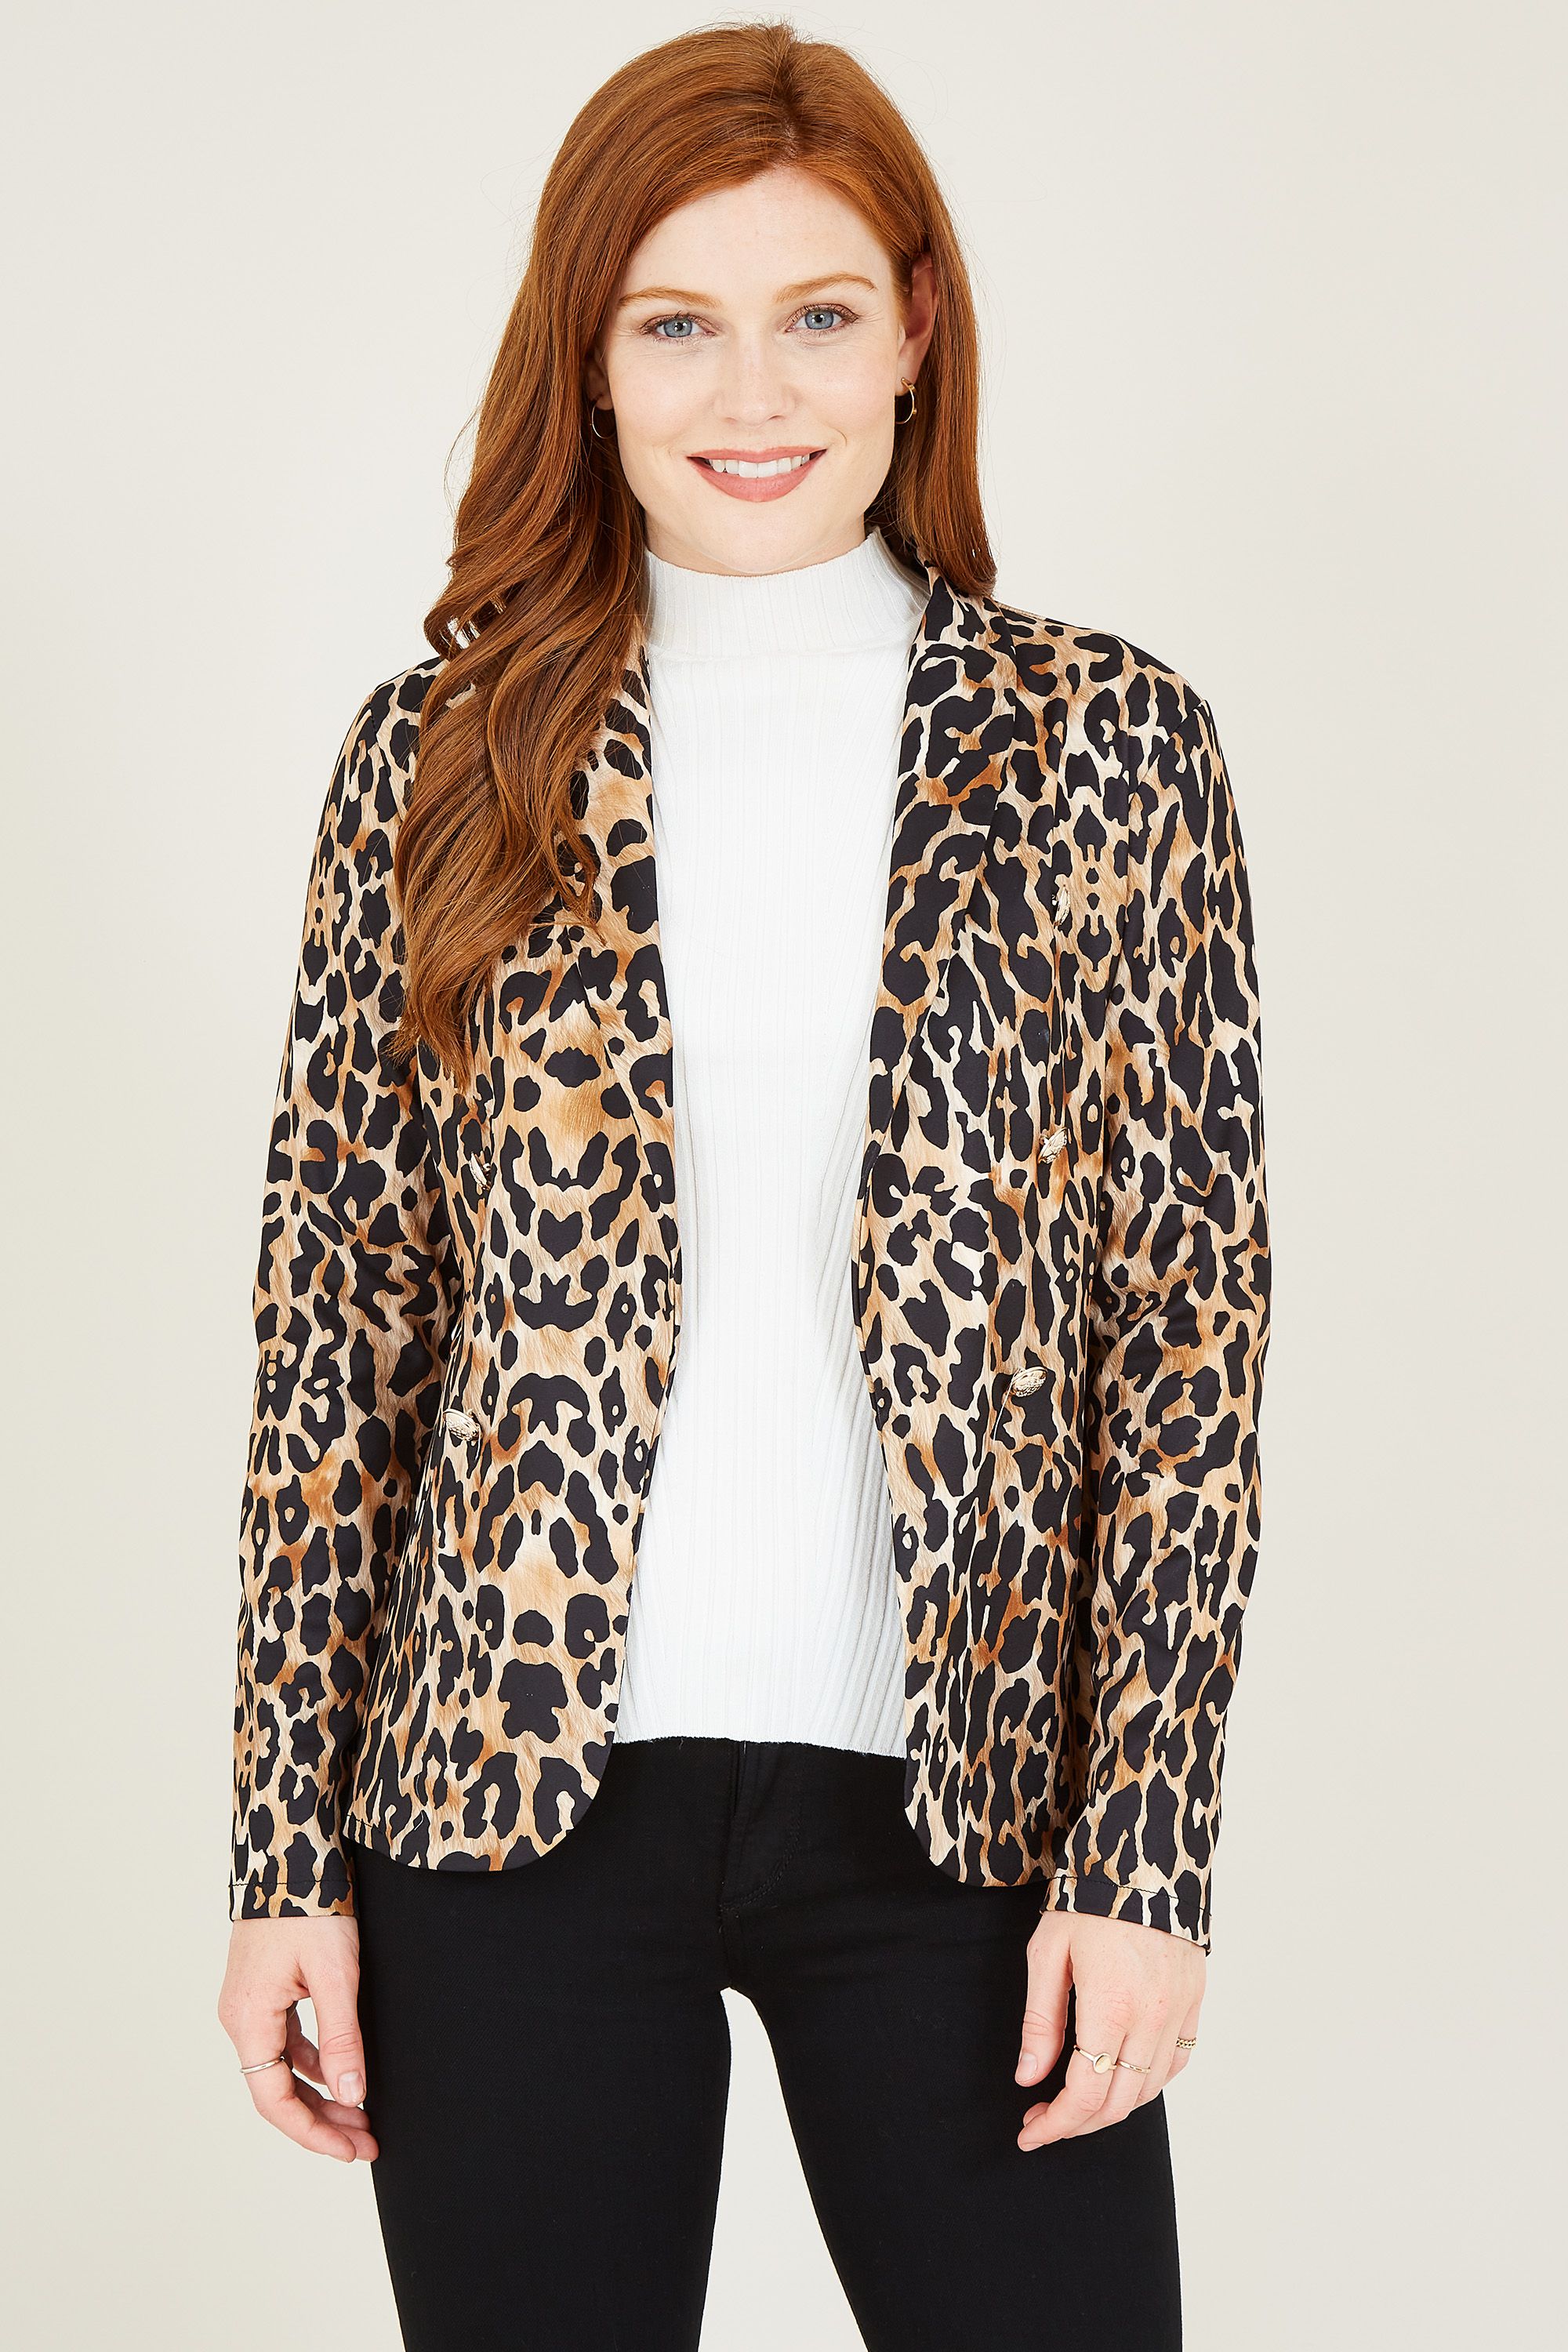 If you've never met an animal print you didn't like, choose this Mela Leopard Jacket as your go-to. Featuring a relaxed blazer shape, it's designed with an open front and long sleeves. The bold animal print lends a modern edge, whilst the soft fabric makes it a comfortable choice. Style with jeans and a t-shirt for a cool off-duty look.